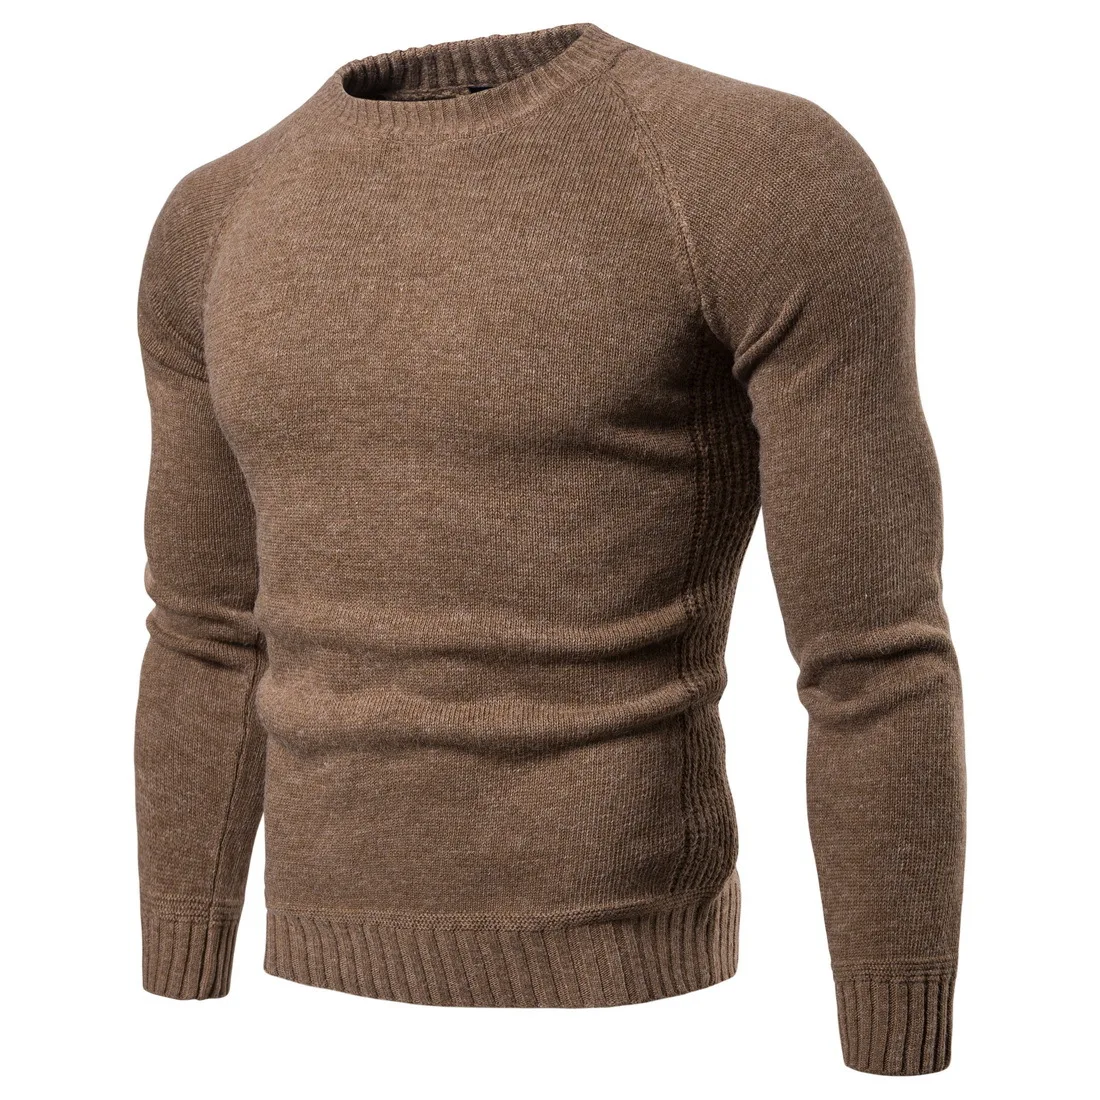 2018 Sweaters Men New Fashion Casual O Neck Slim Cotton Knit Quality ...